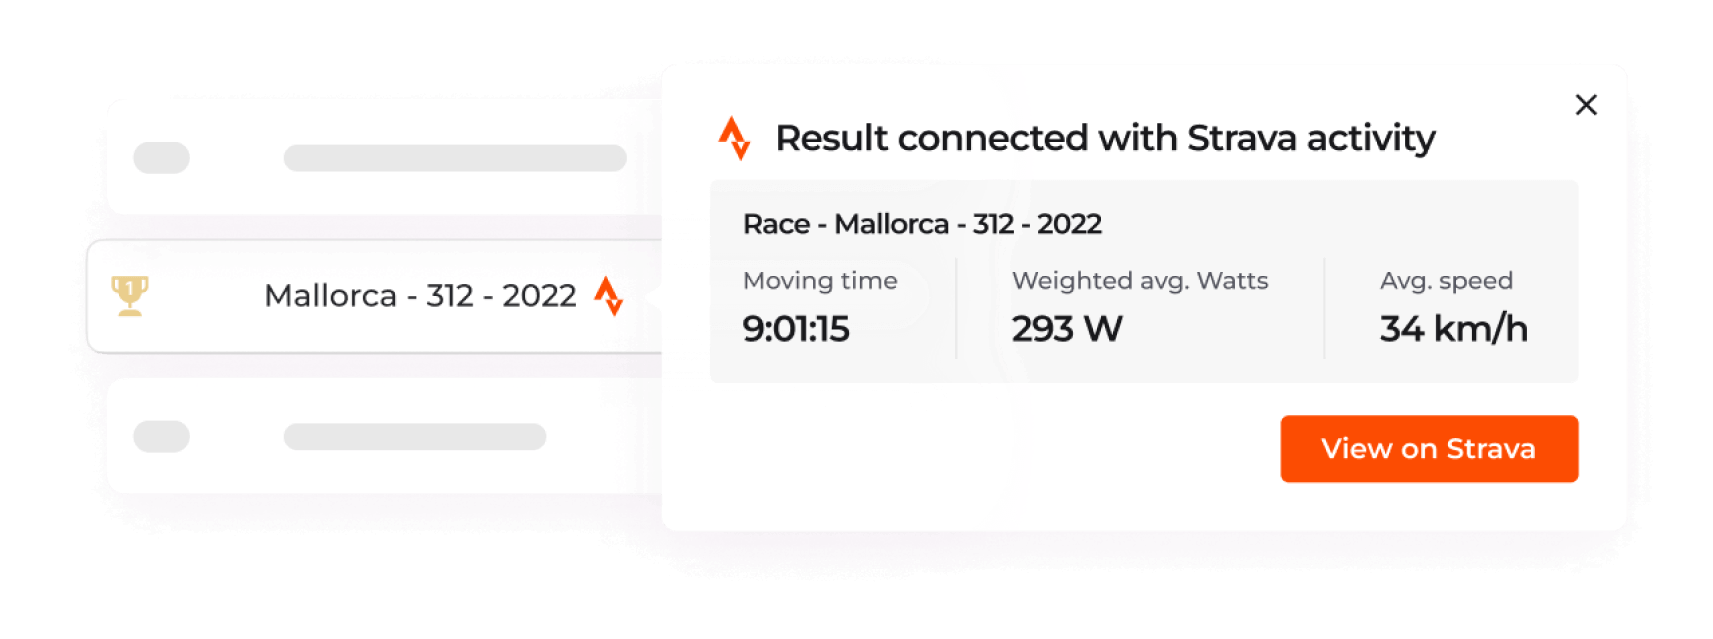 Race linked with Strava activity details UI example